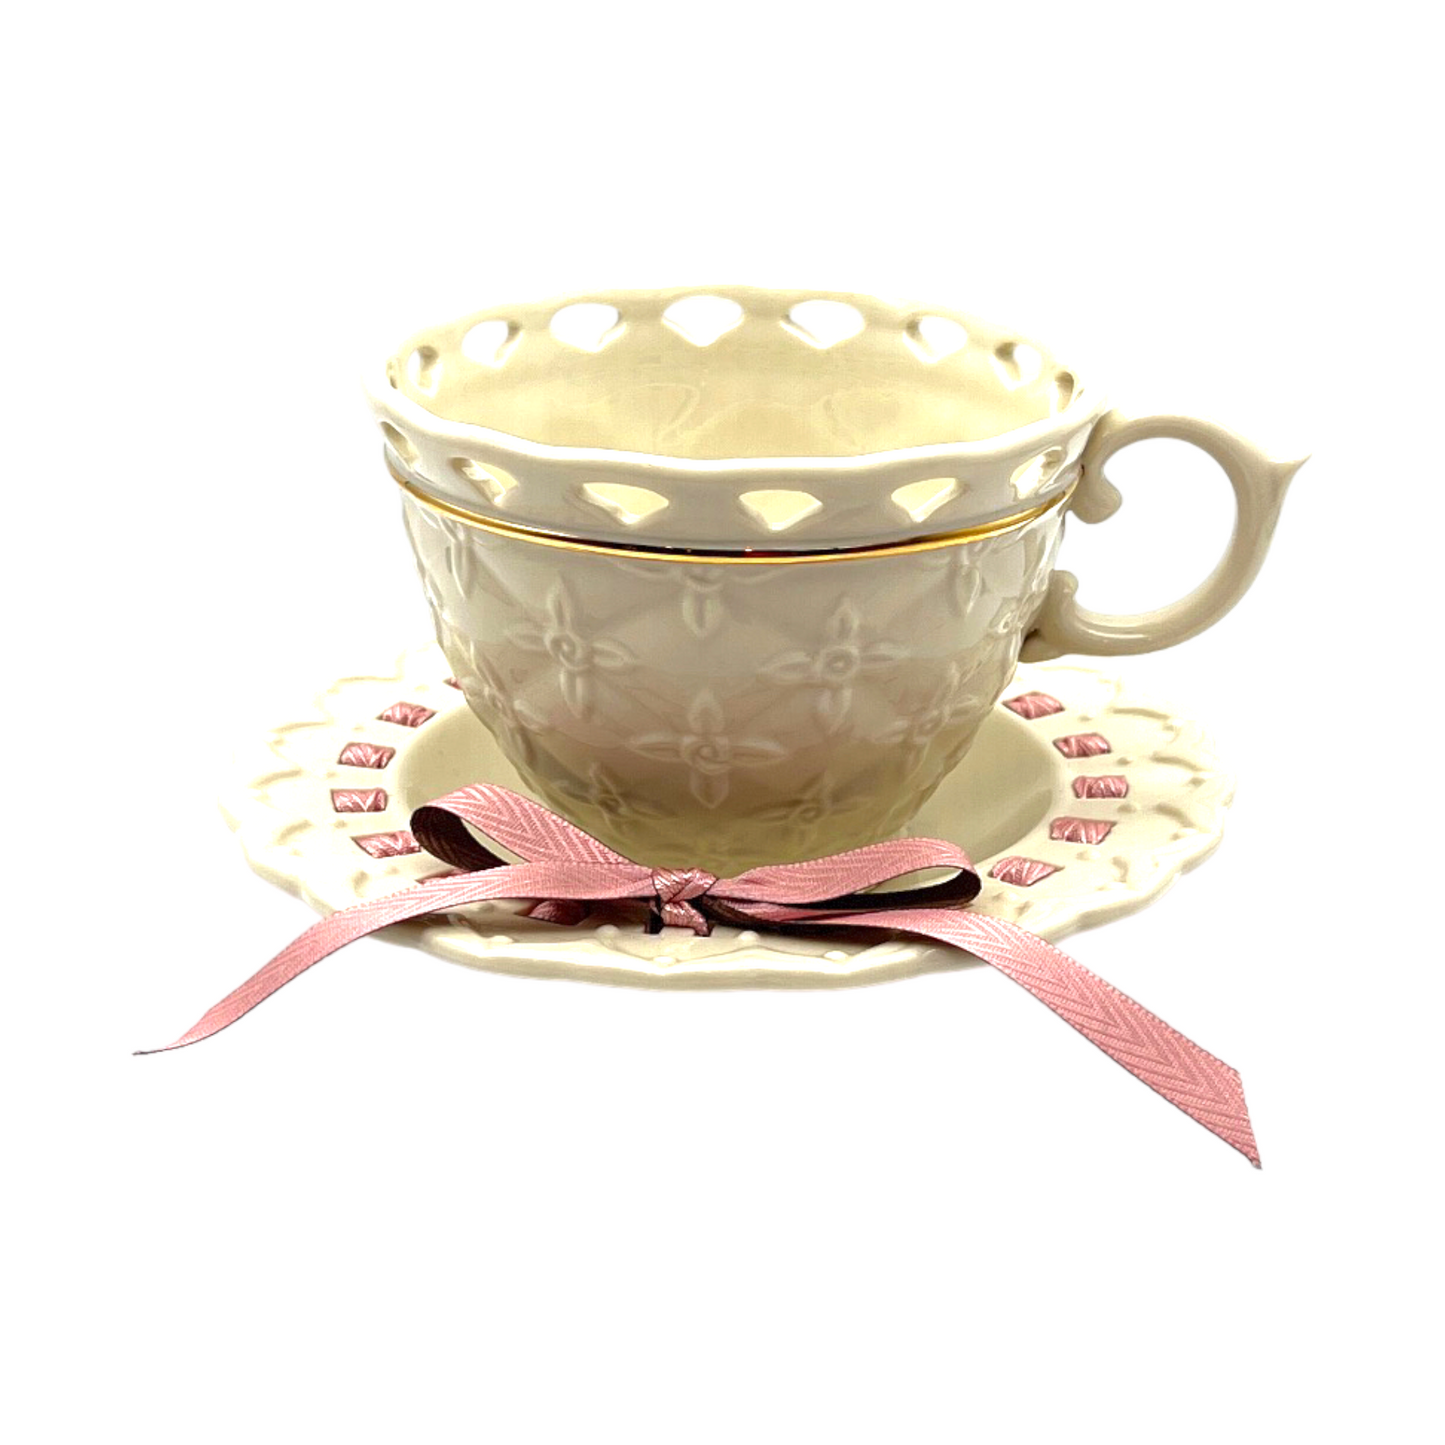 Lenox - Tied With Love Tahila Teacup & Attached Saucer - 1989 - 3.5"